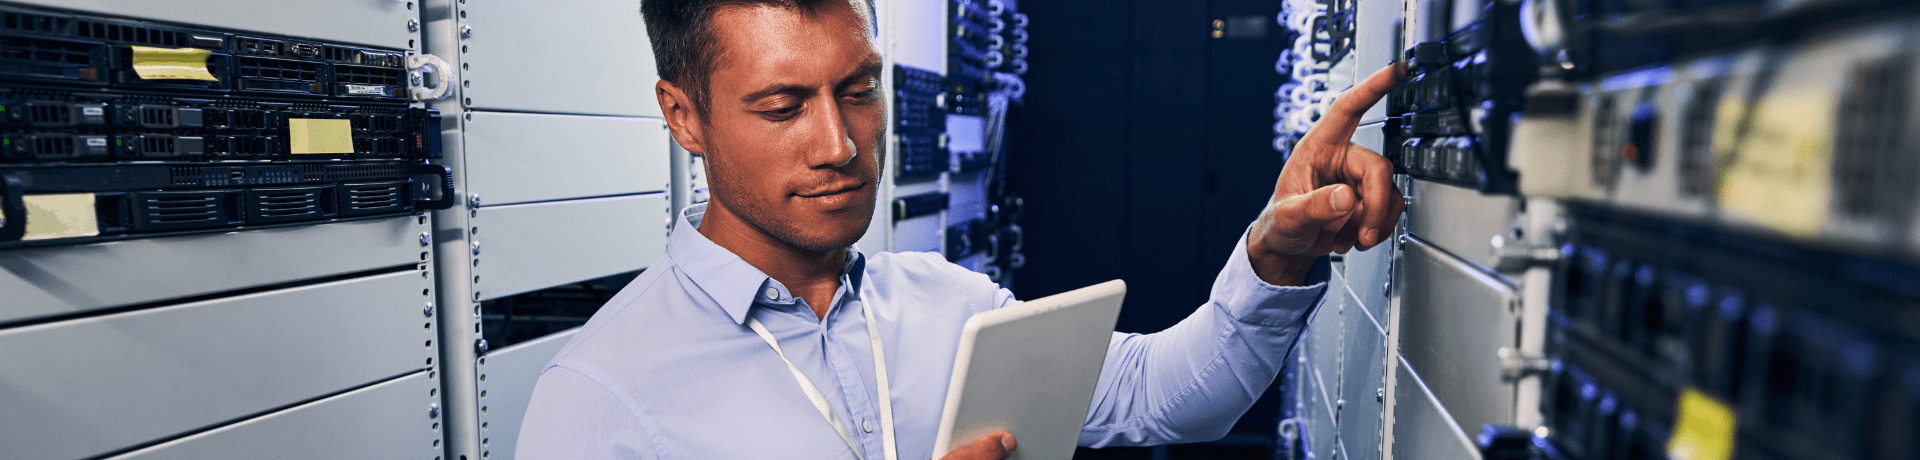 Is the CompTIA A+ Certification Worth Getting for an Entry-Level IT Job?